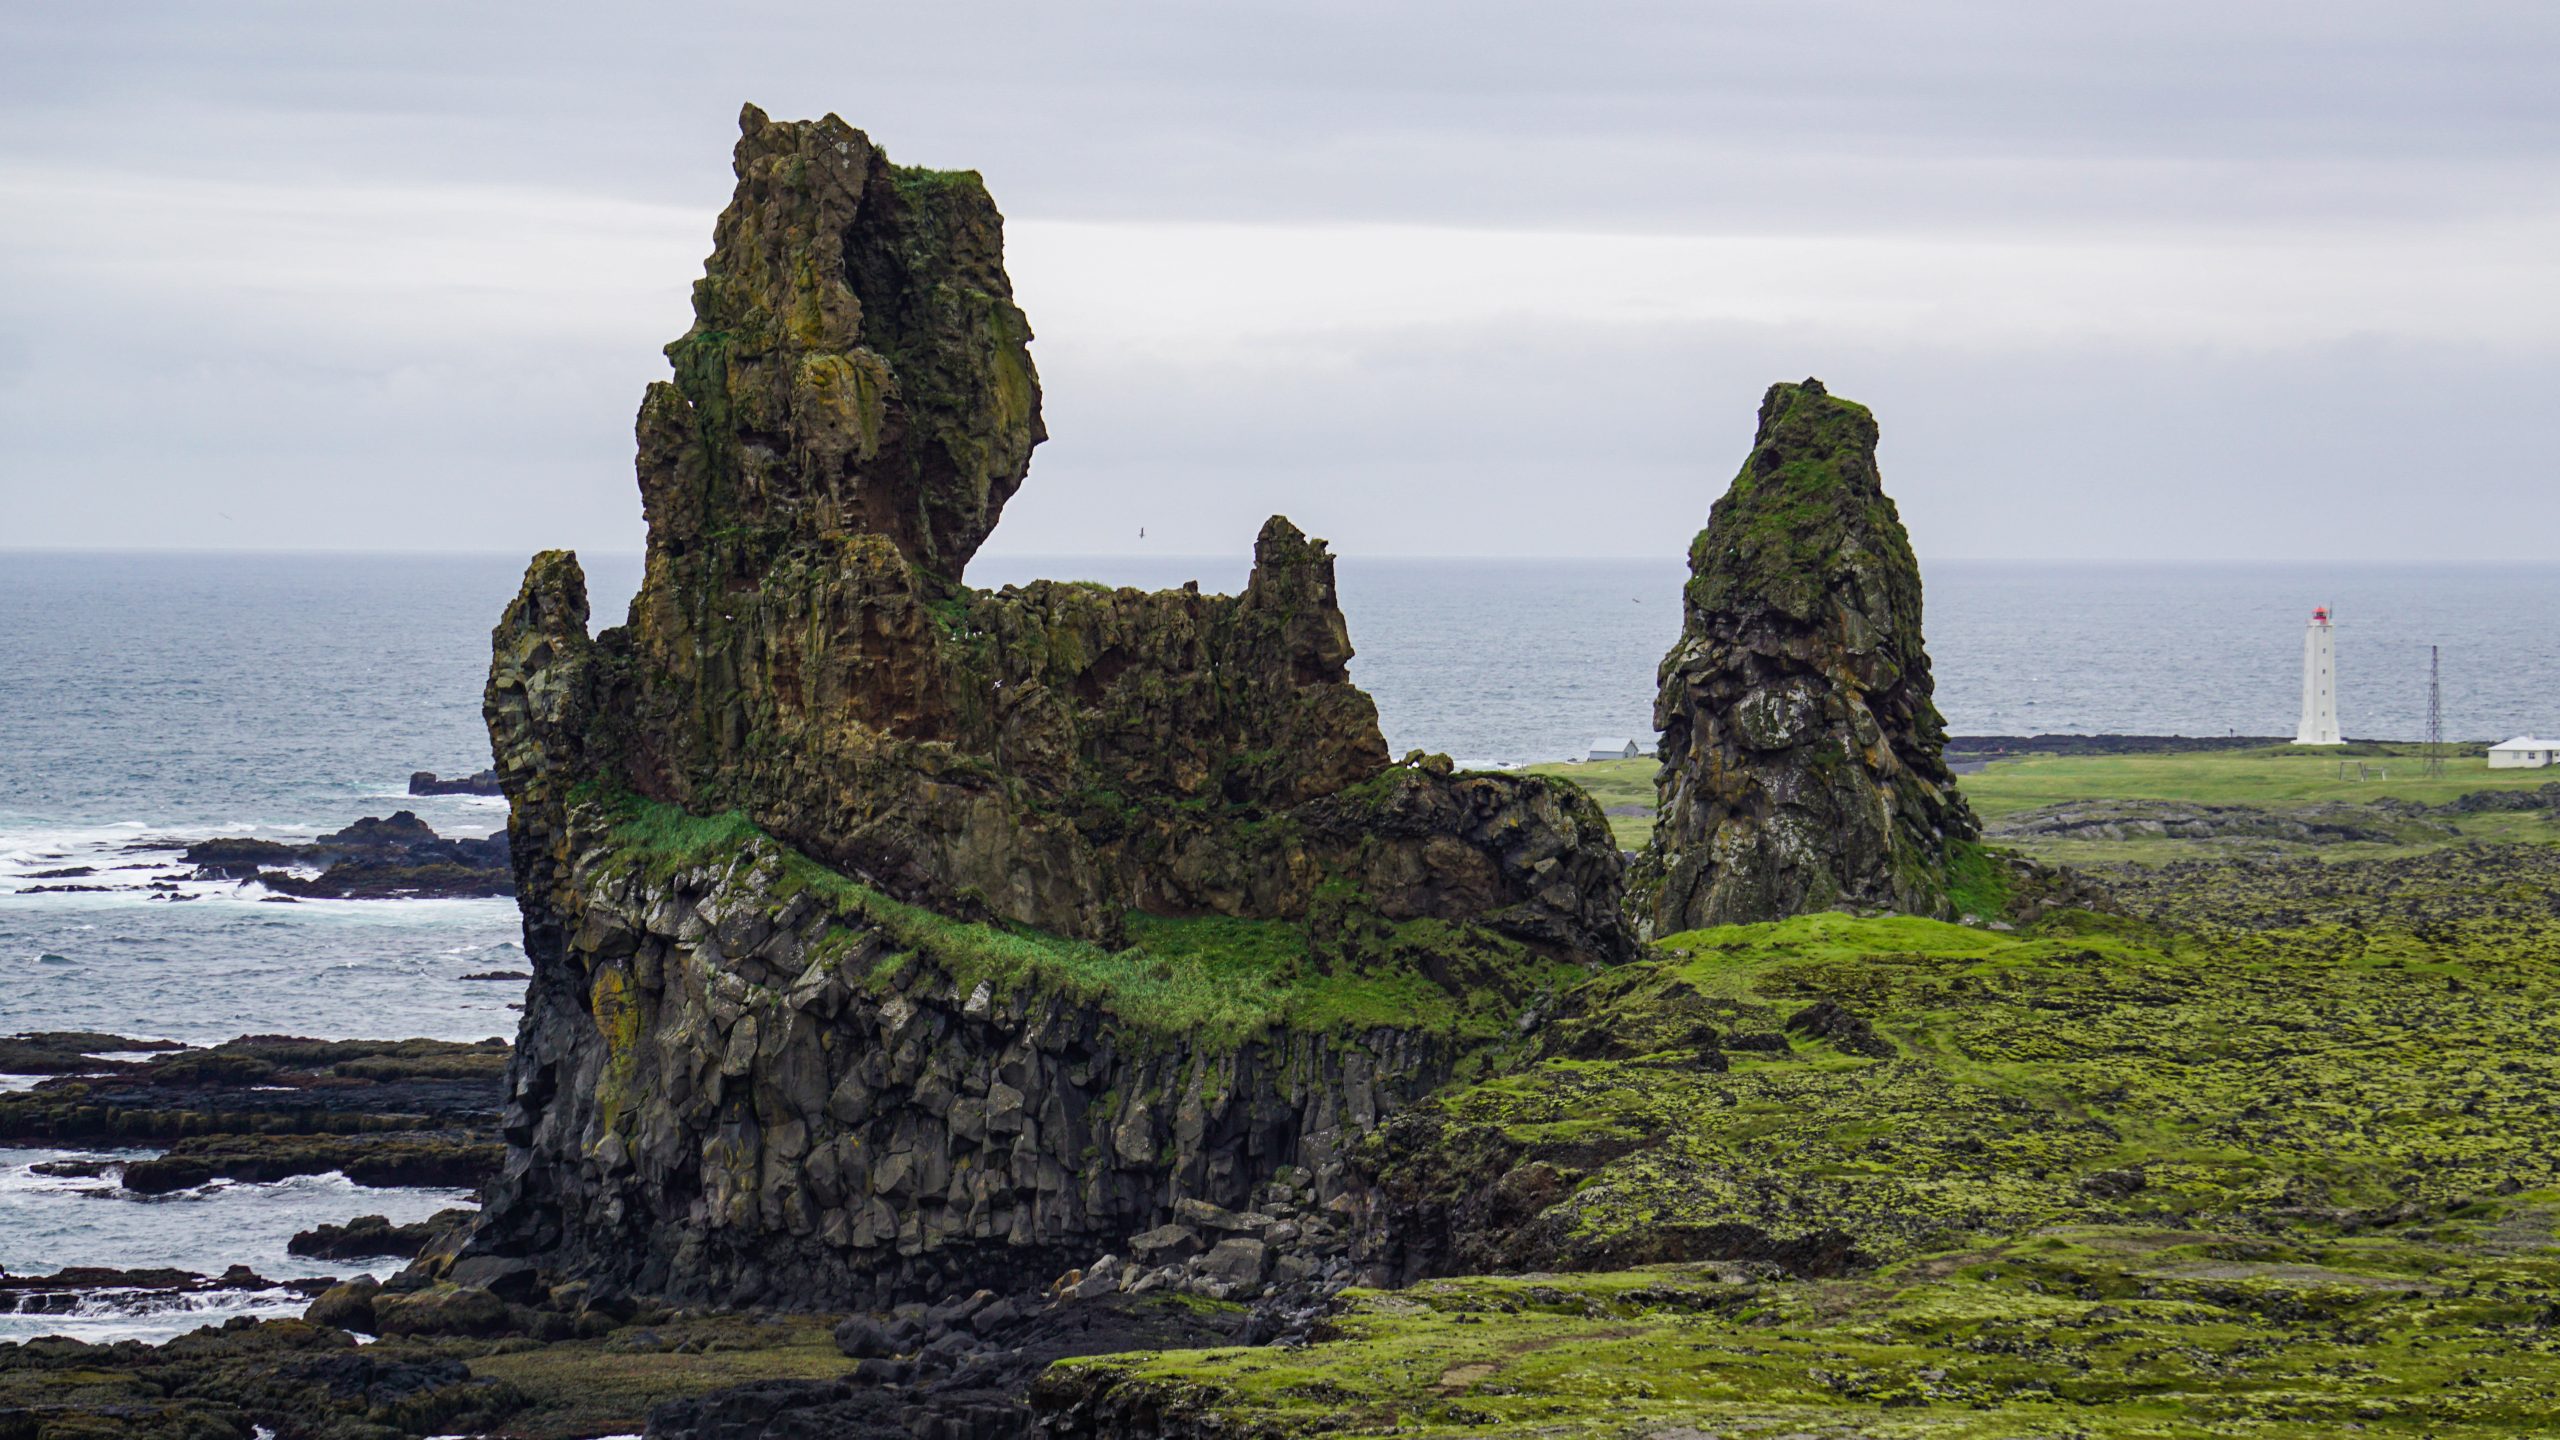 A rock formation on the Icelandic coast